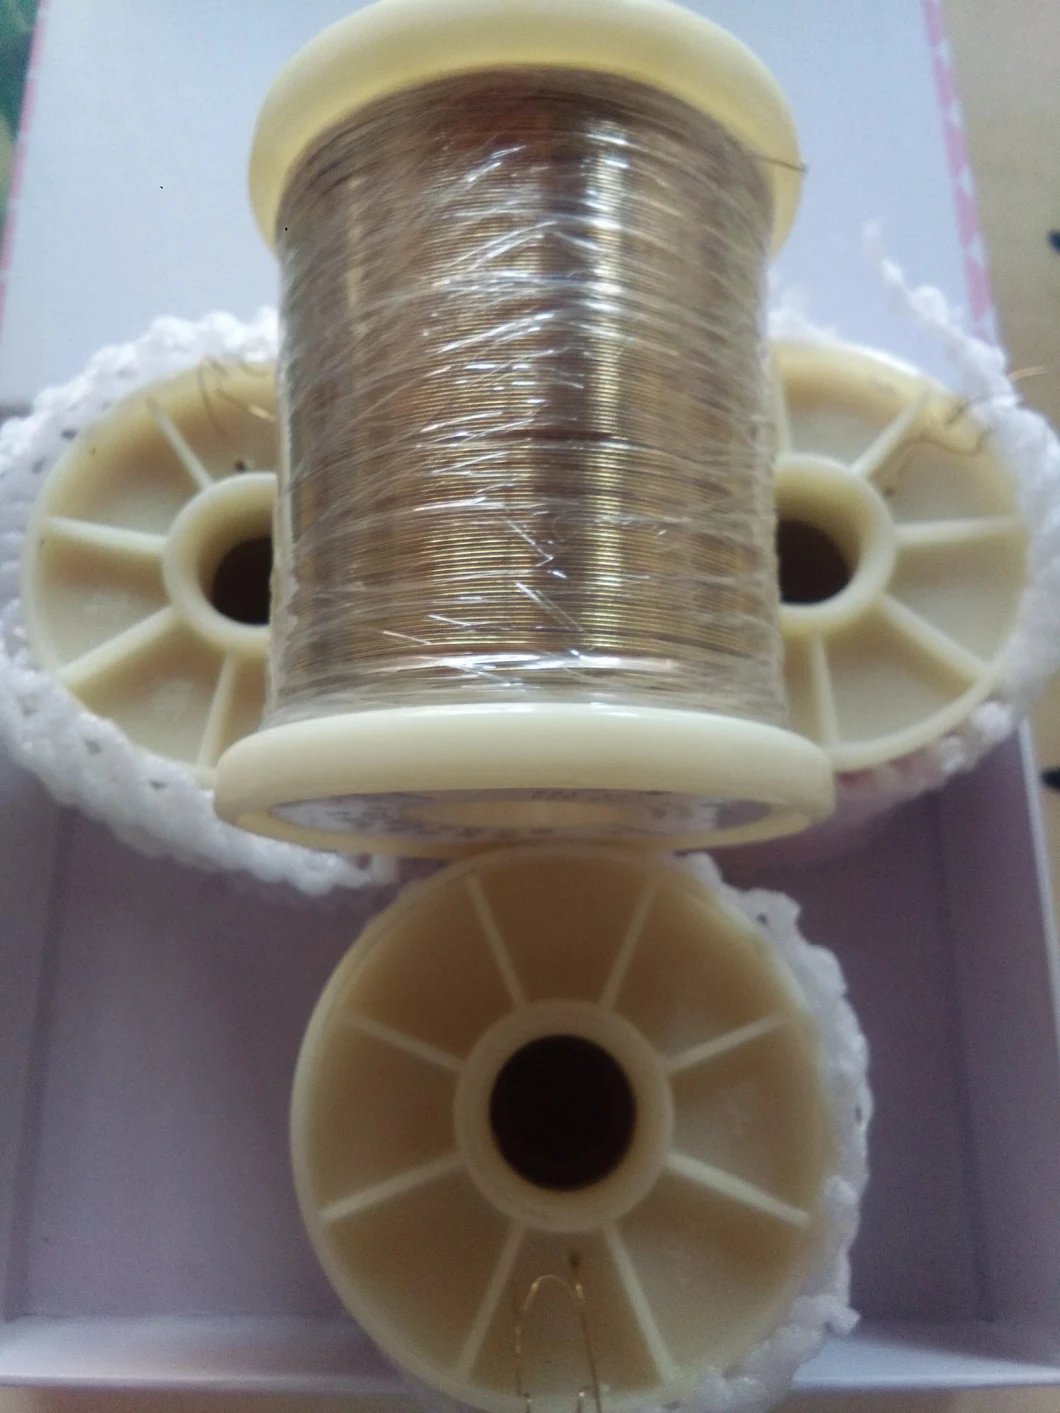 72% Silver Wire Hl308 Vacuum Electrode/Wire/Sheet Manufacturer